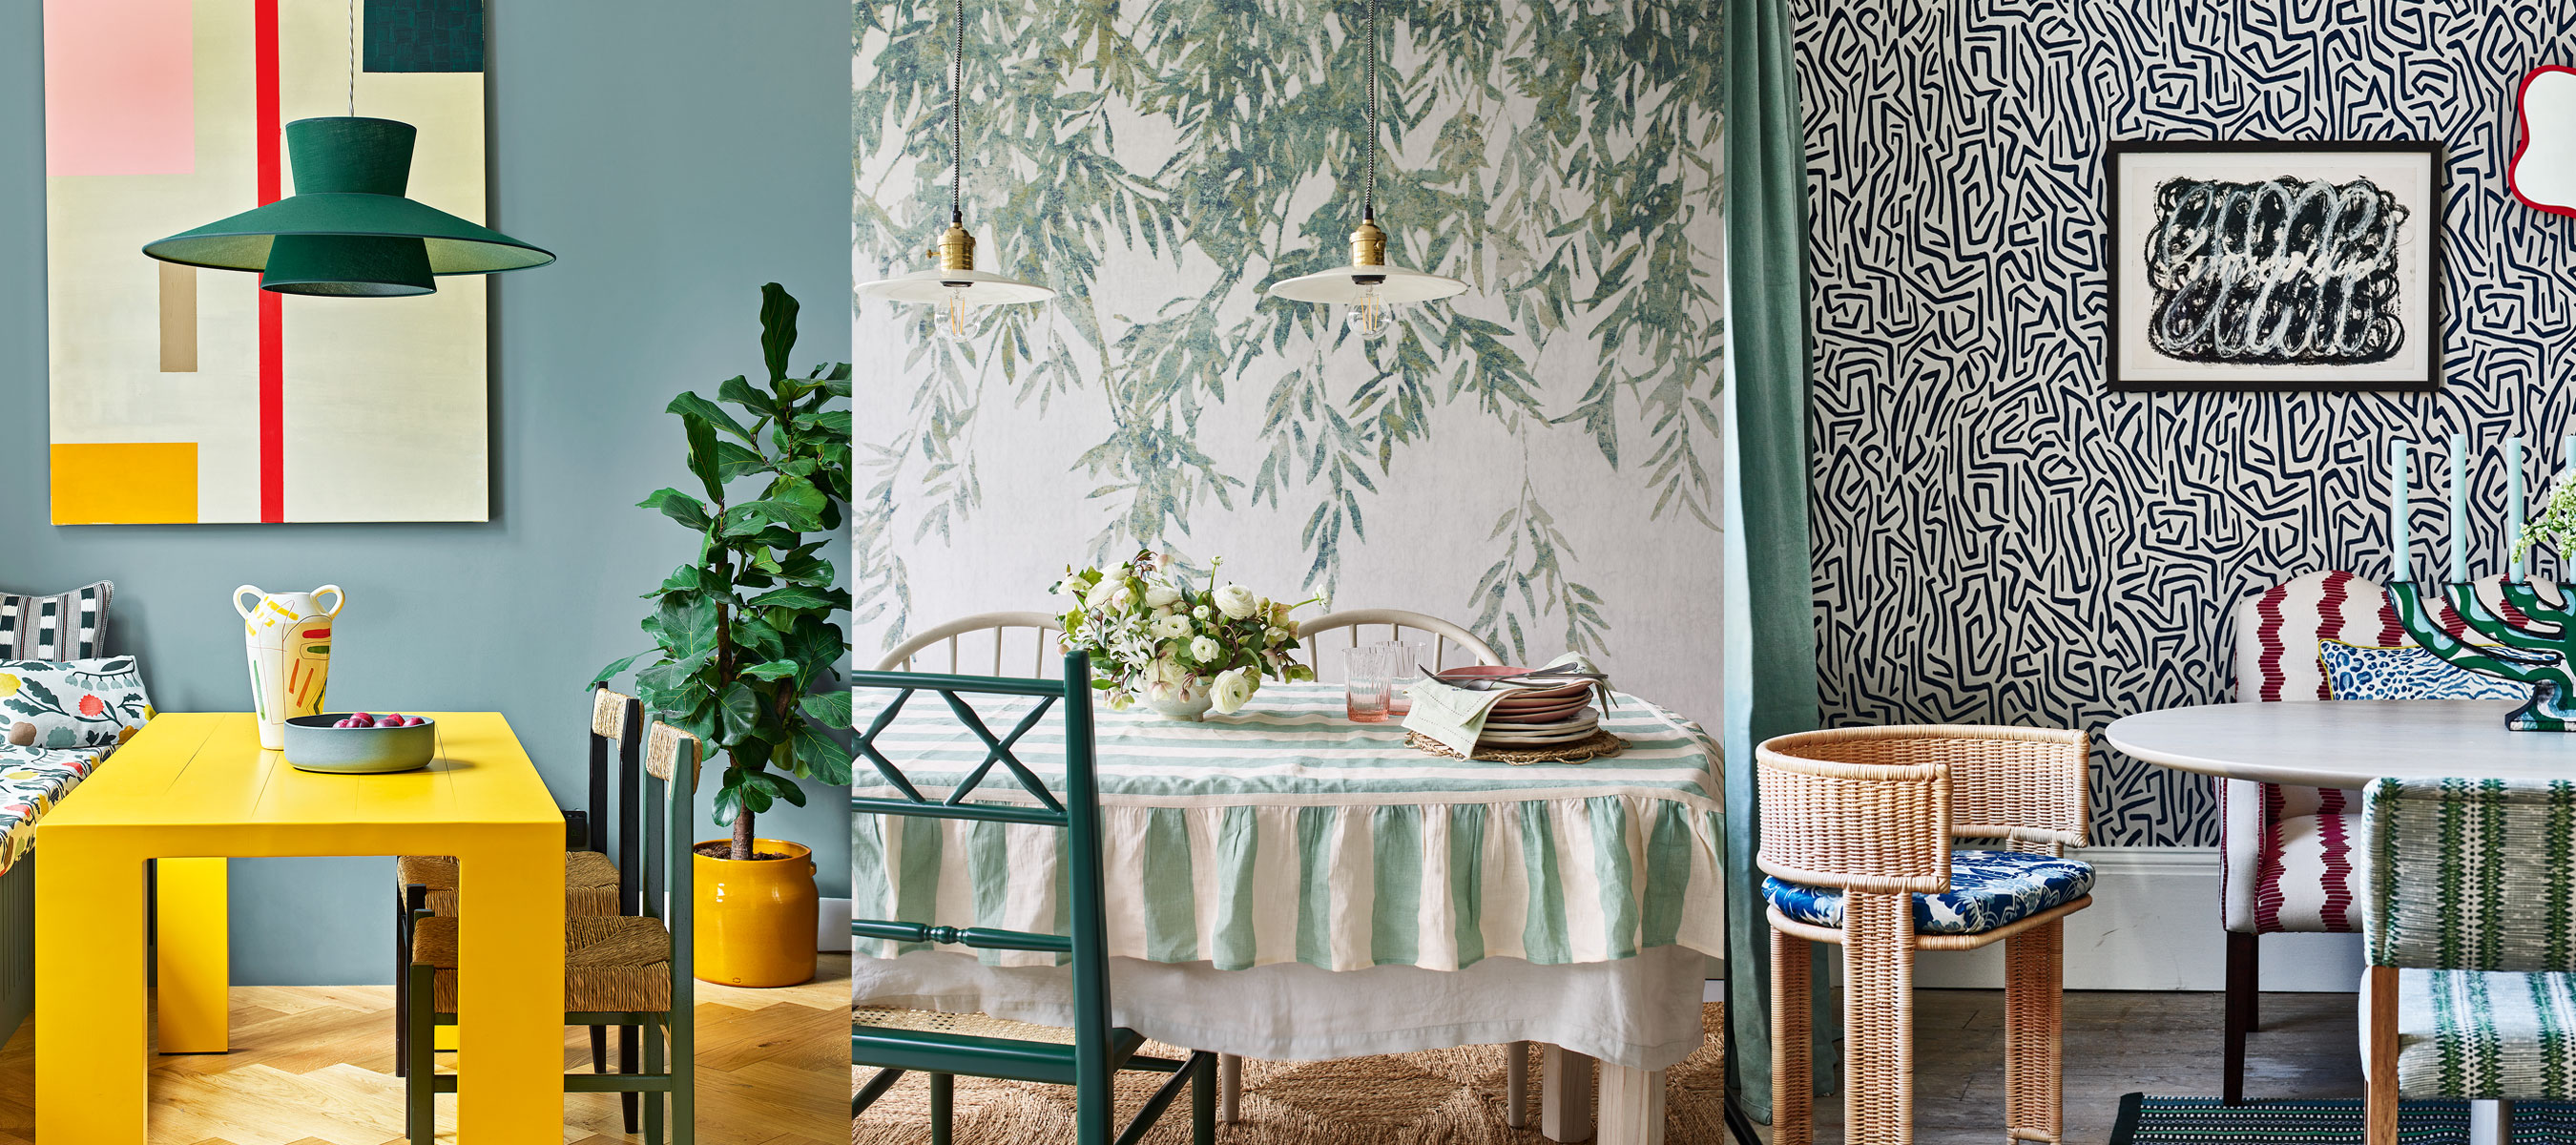 wall colors for dining rooms